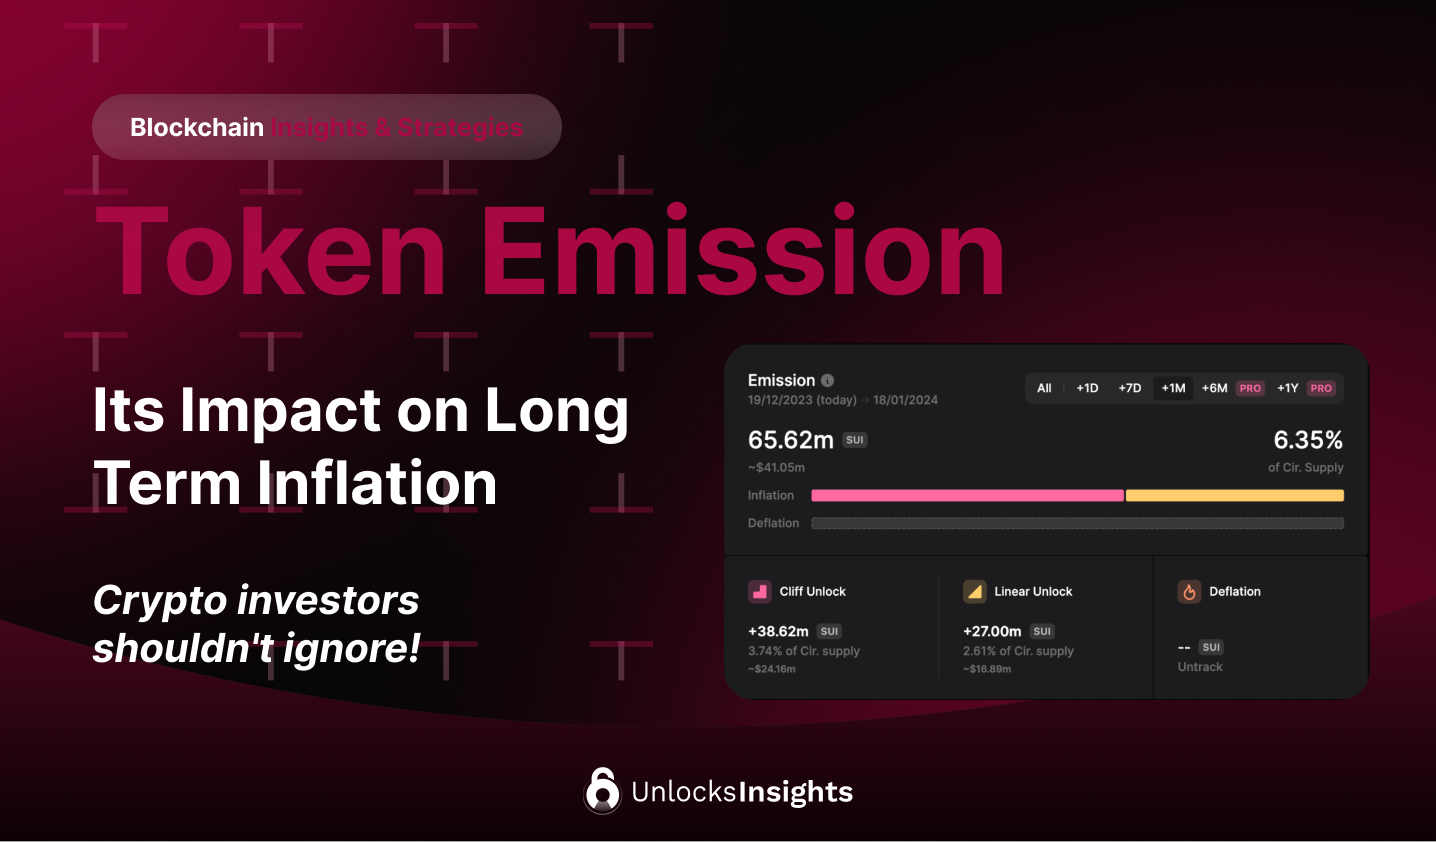 Token Emission - Its Impact on Long Term Inflation